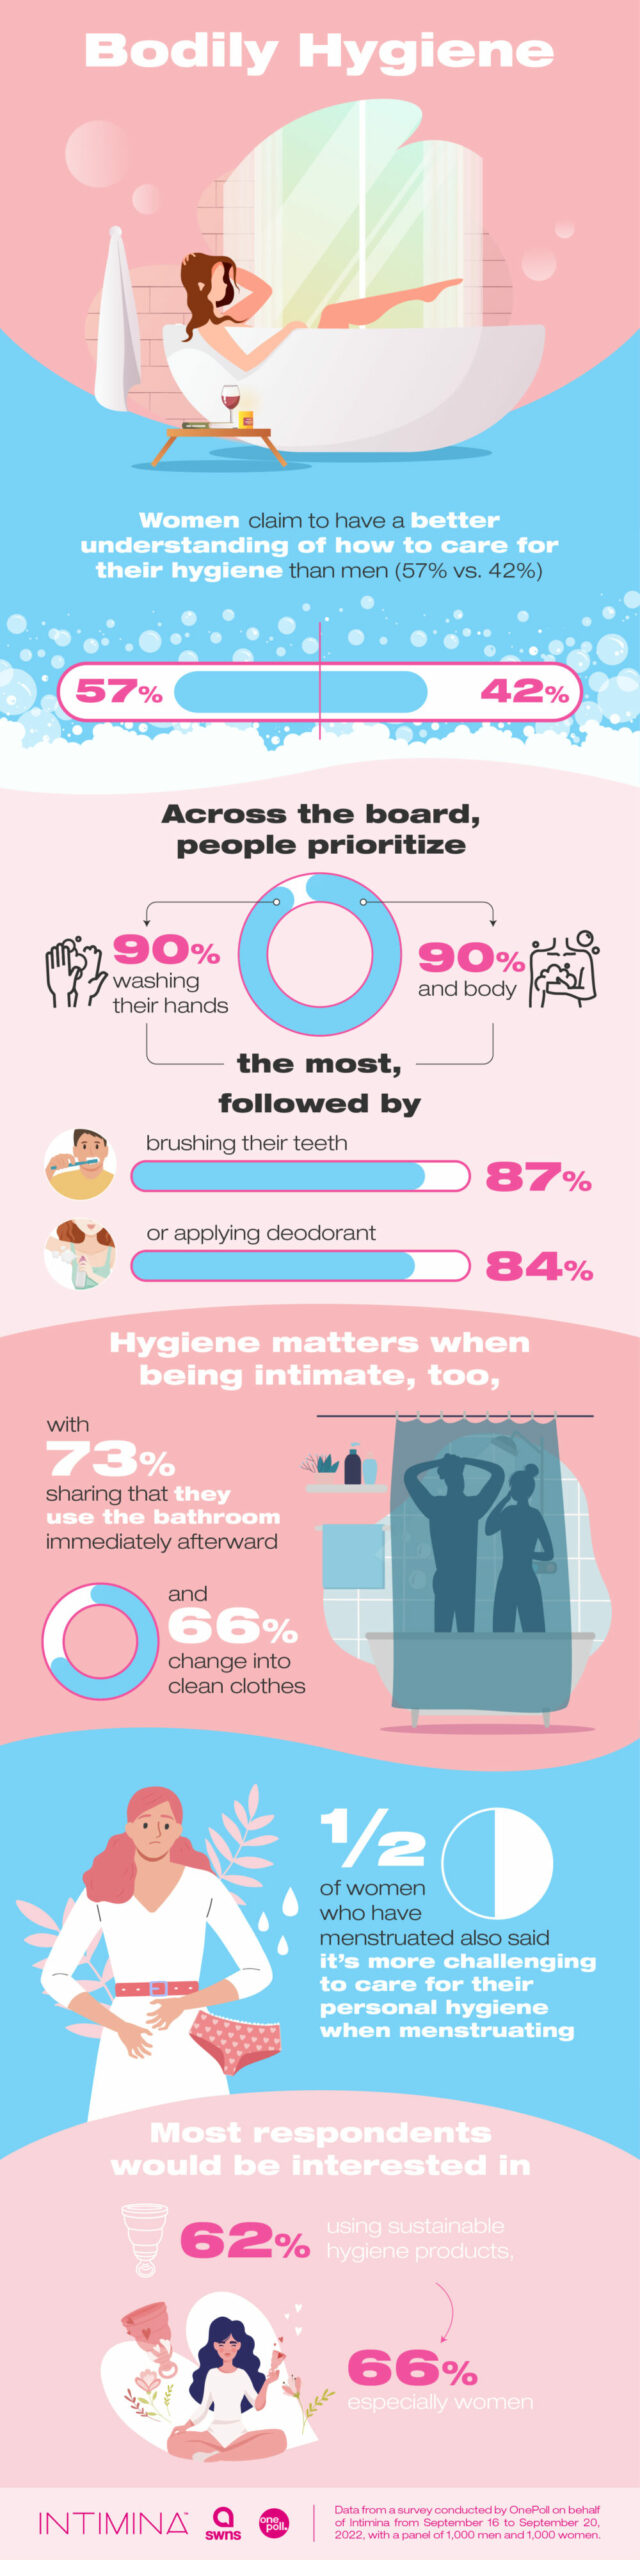 Women have a better understanding of how to care for their hygiene than ...